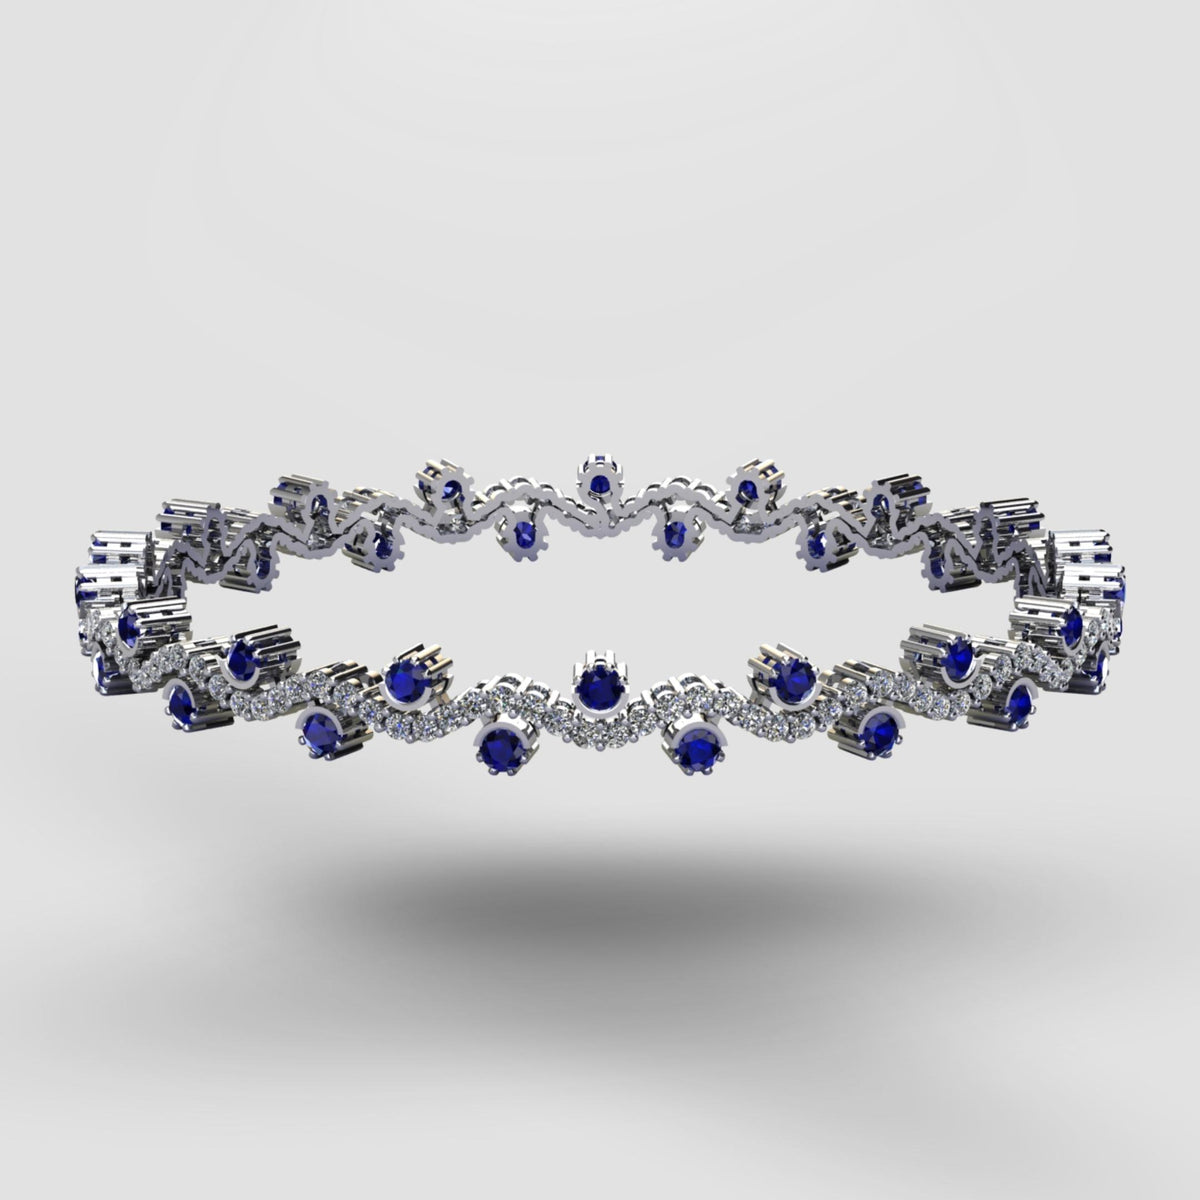 Silver Bangles S Shape with Blue Stone